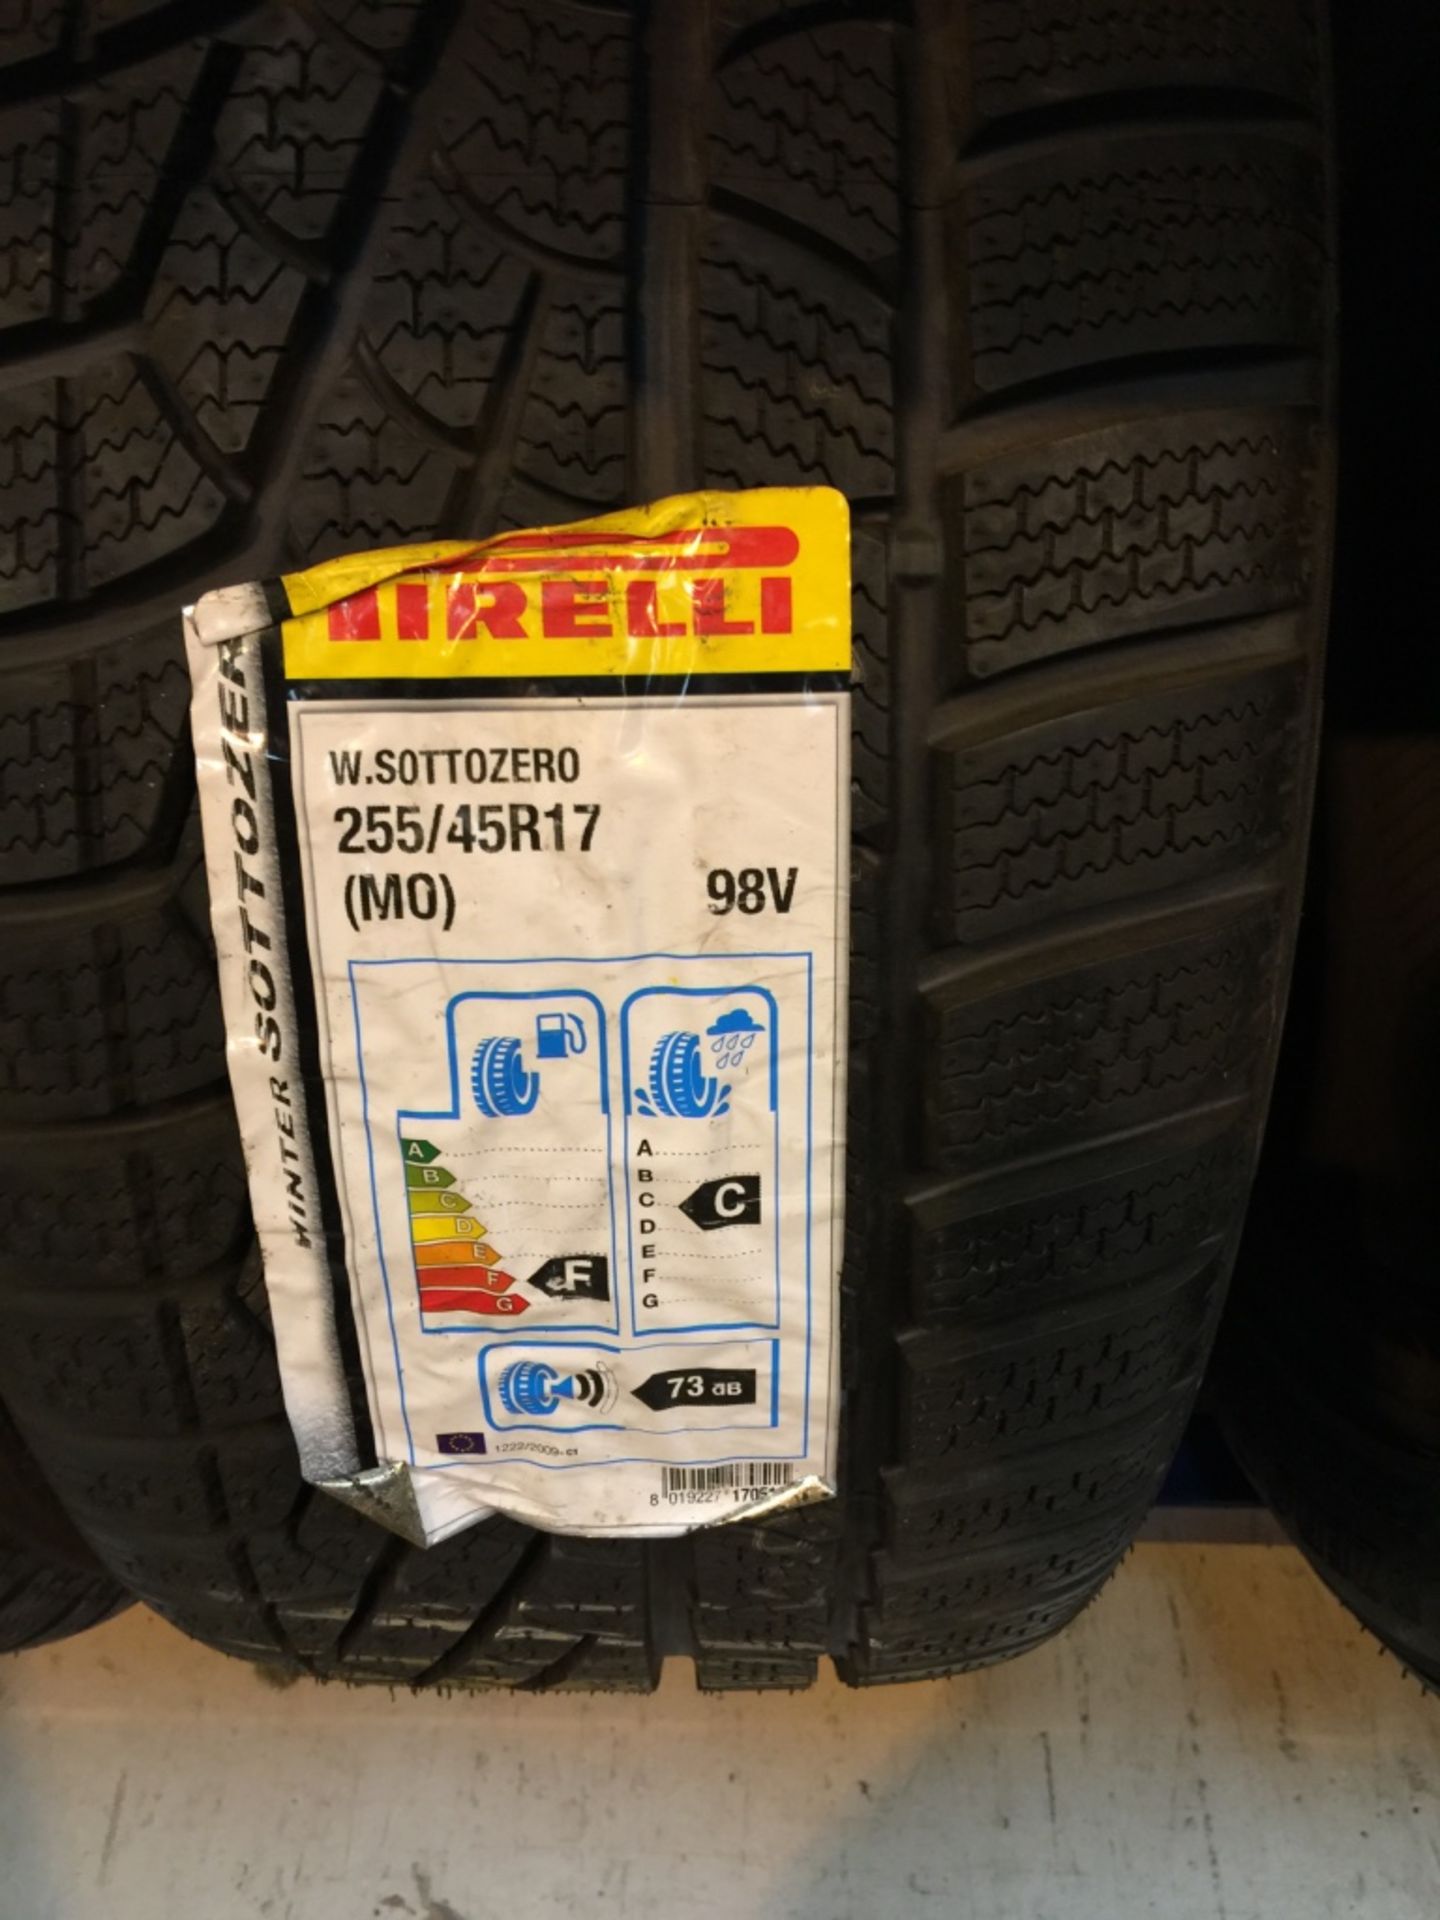 54: Pirelli Tyres Car & 4X4 - Many Large Sizes to include 18,19,21" Please see further Pictures ( - Image 40 of 55